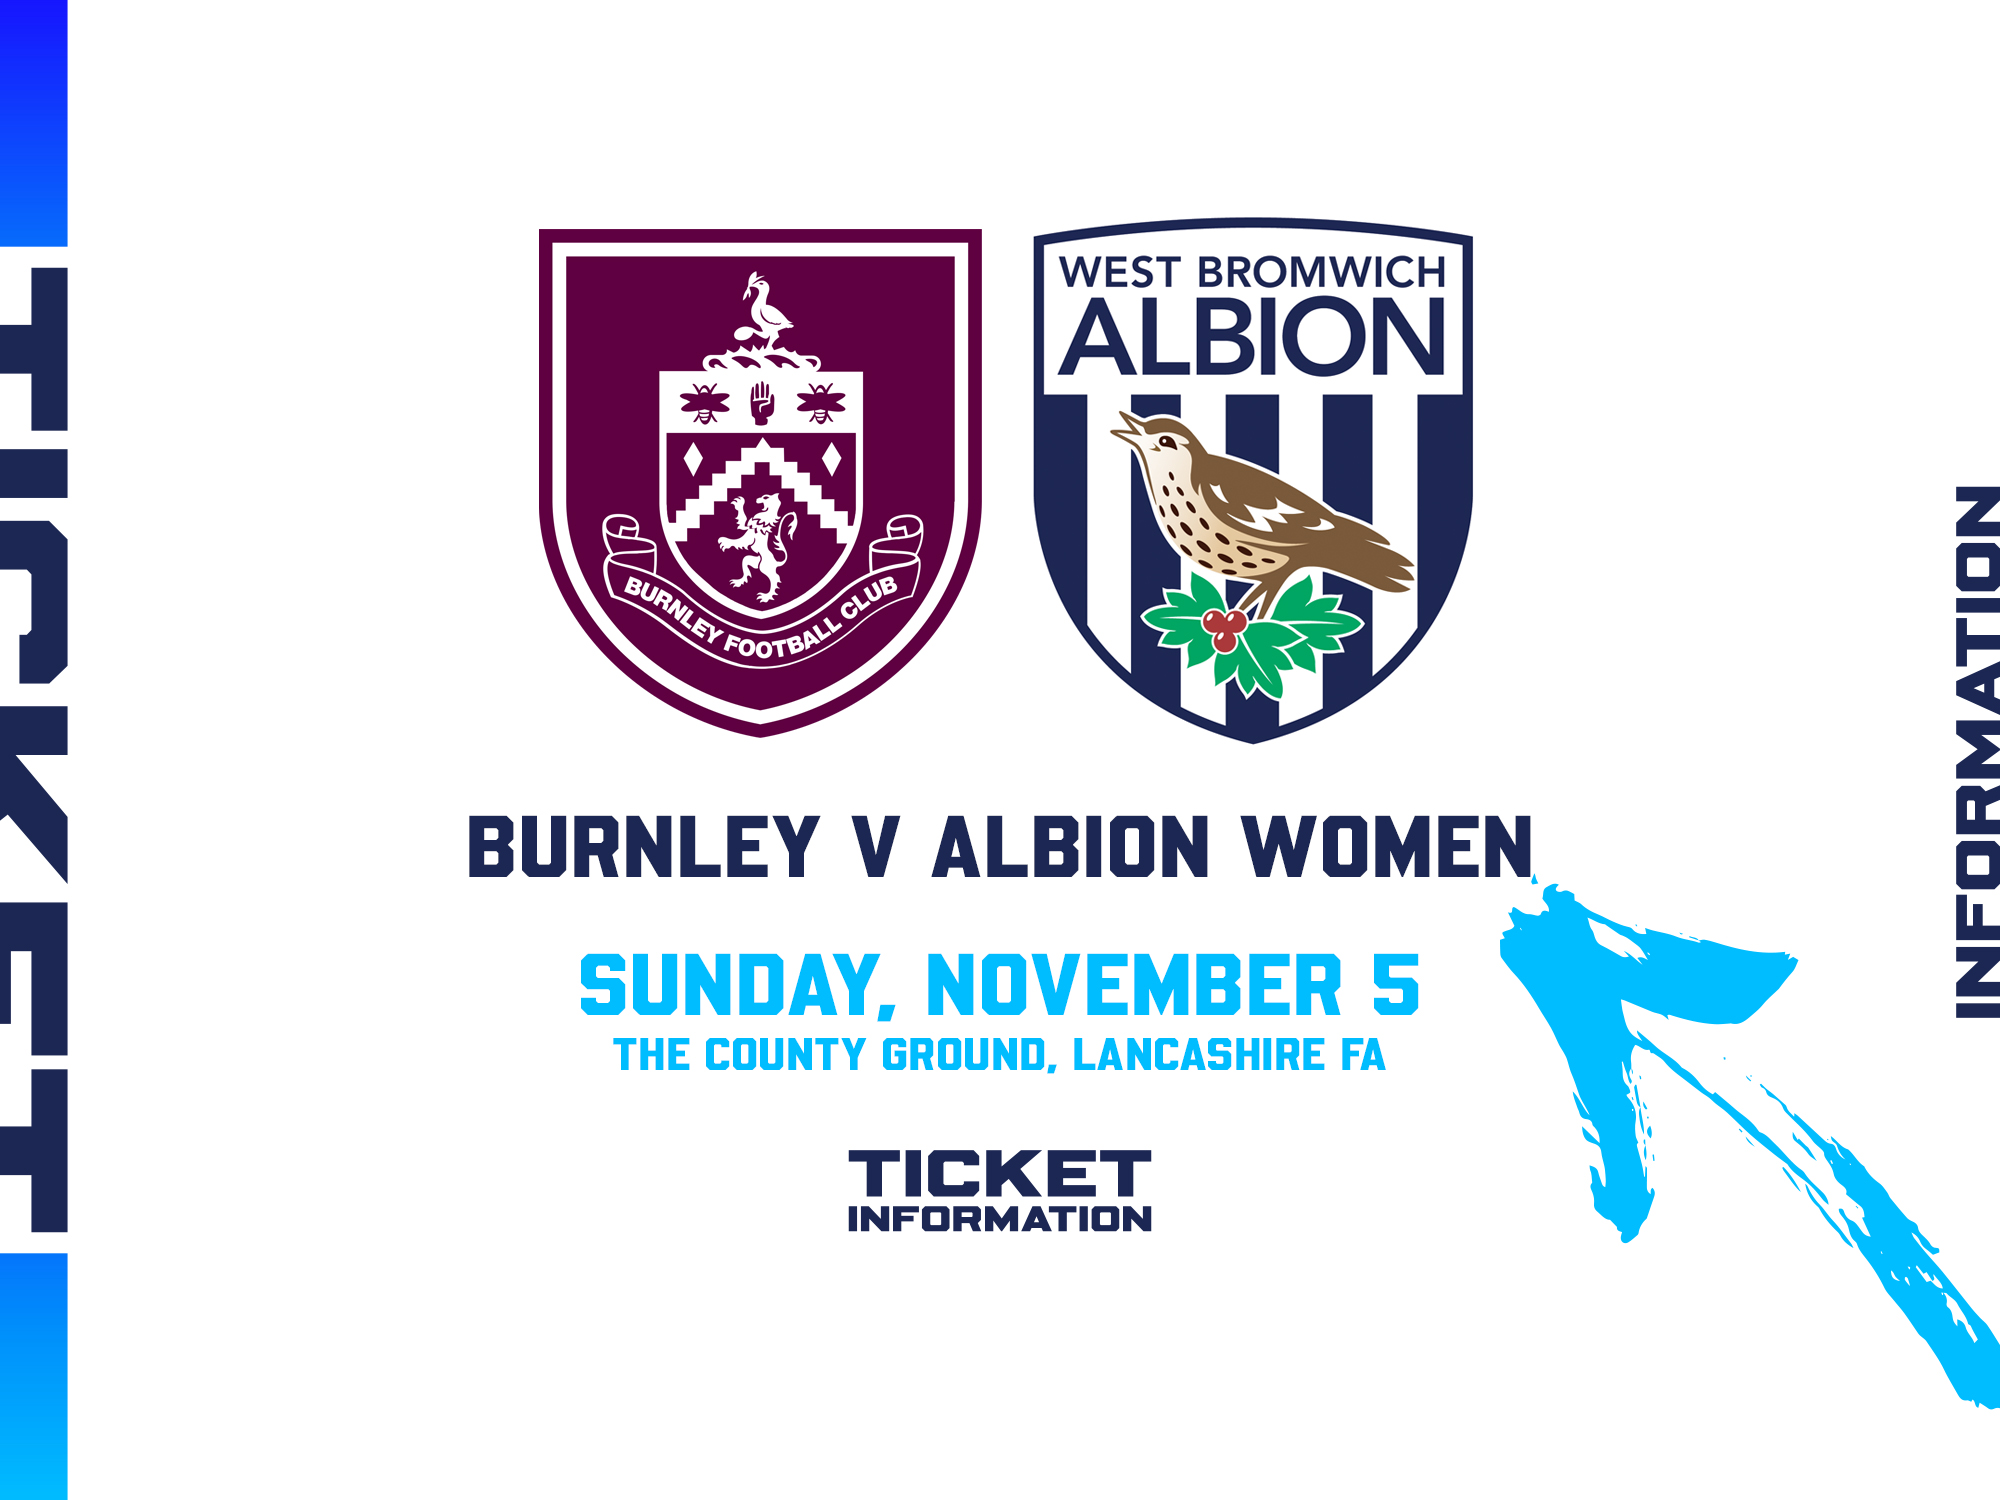 A graphic, showing the club crests of Burnley and Albion, leading to a match preview for Albion Women's game v Burnley